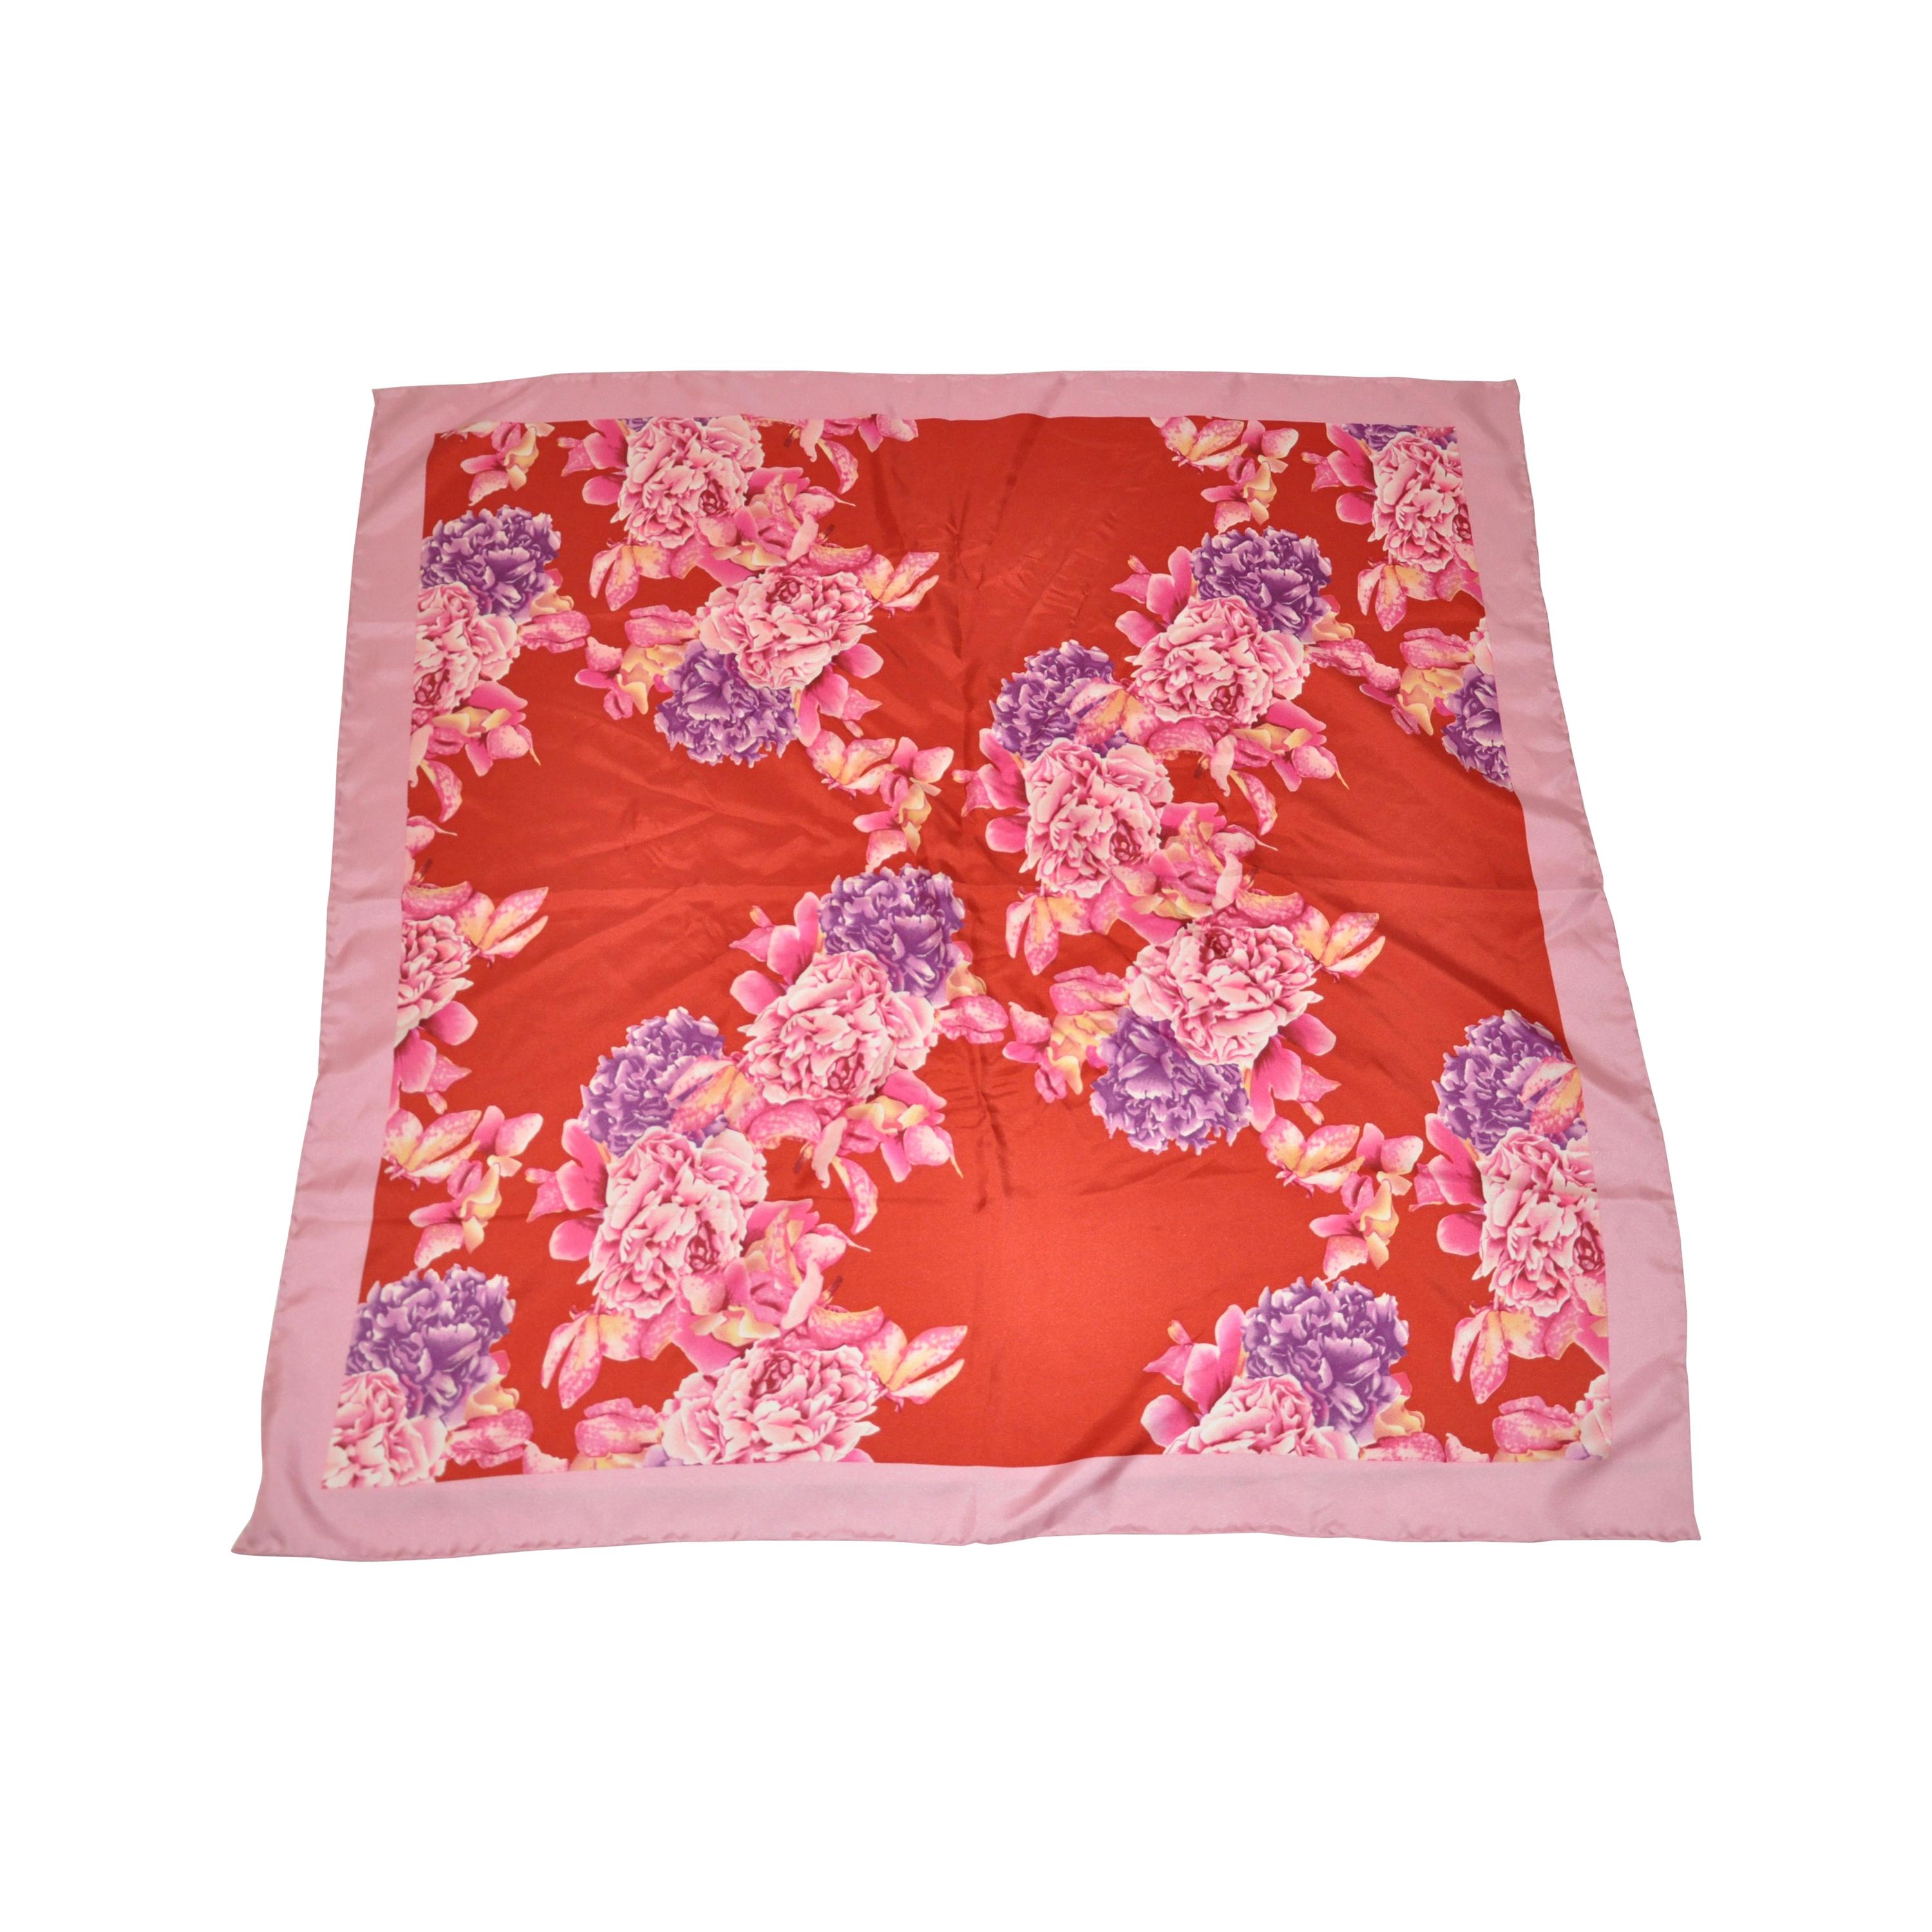 Majestic & Beautiful Vivid "Shades of Red, Pink & Violet  Roses"  Silk Scarf  For Sale